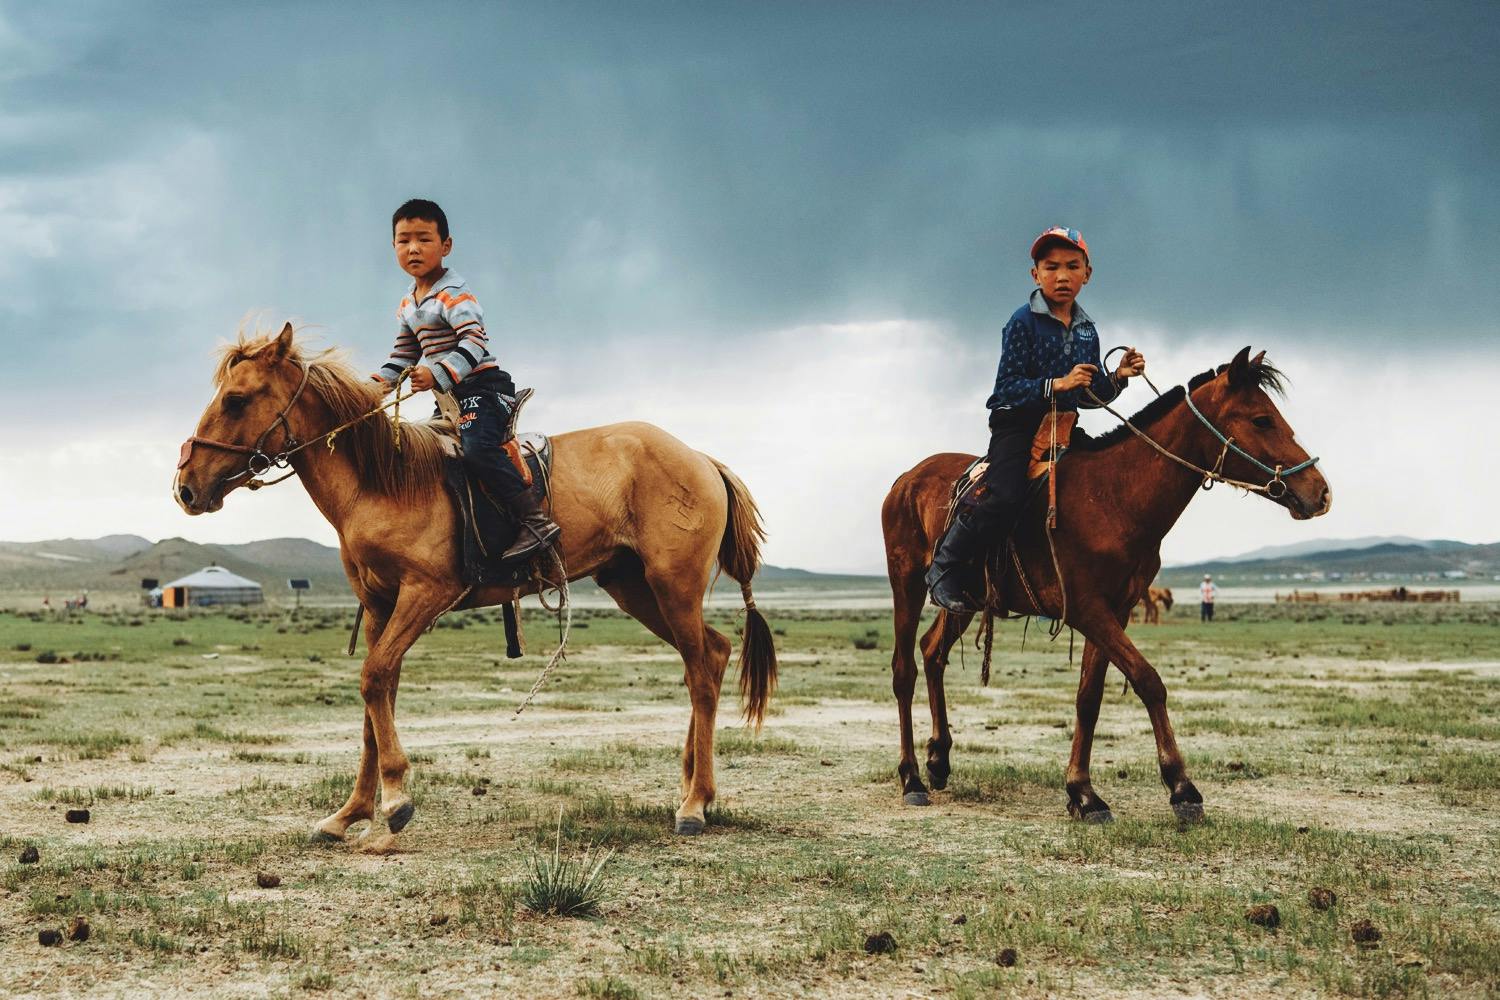 Nomad Kids in Mongolia